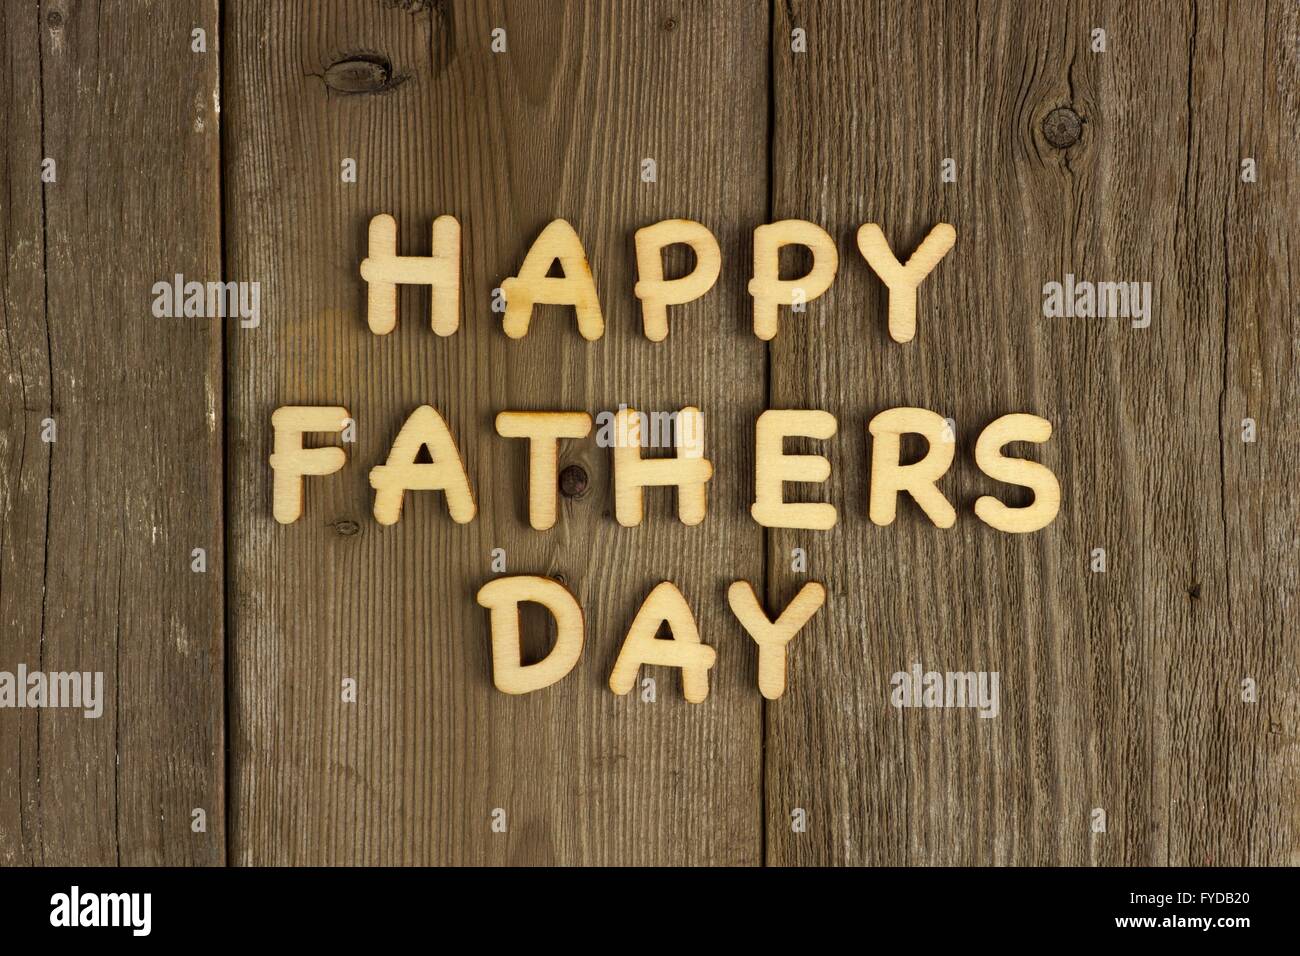 Happy Fathers Day wooden letters on a rustic wood background Stock Photo